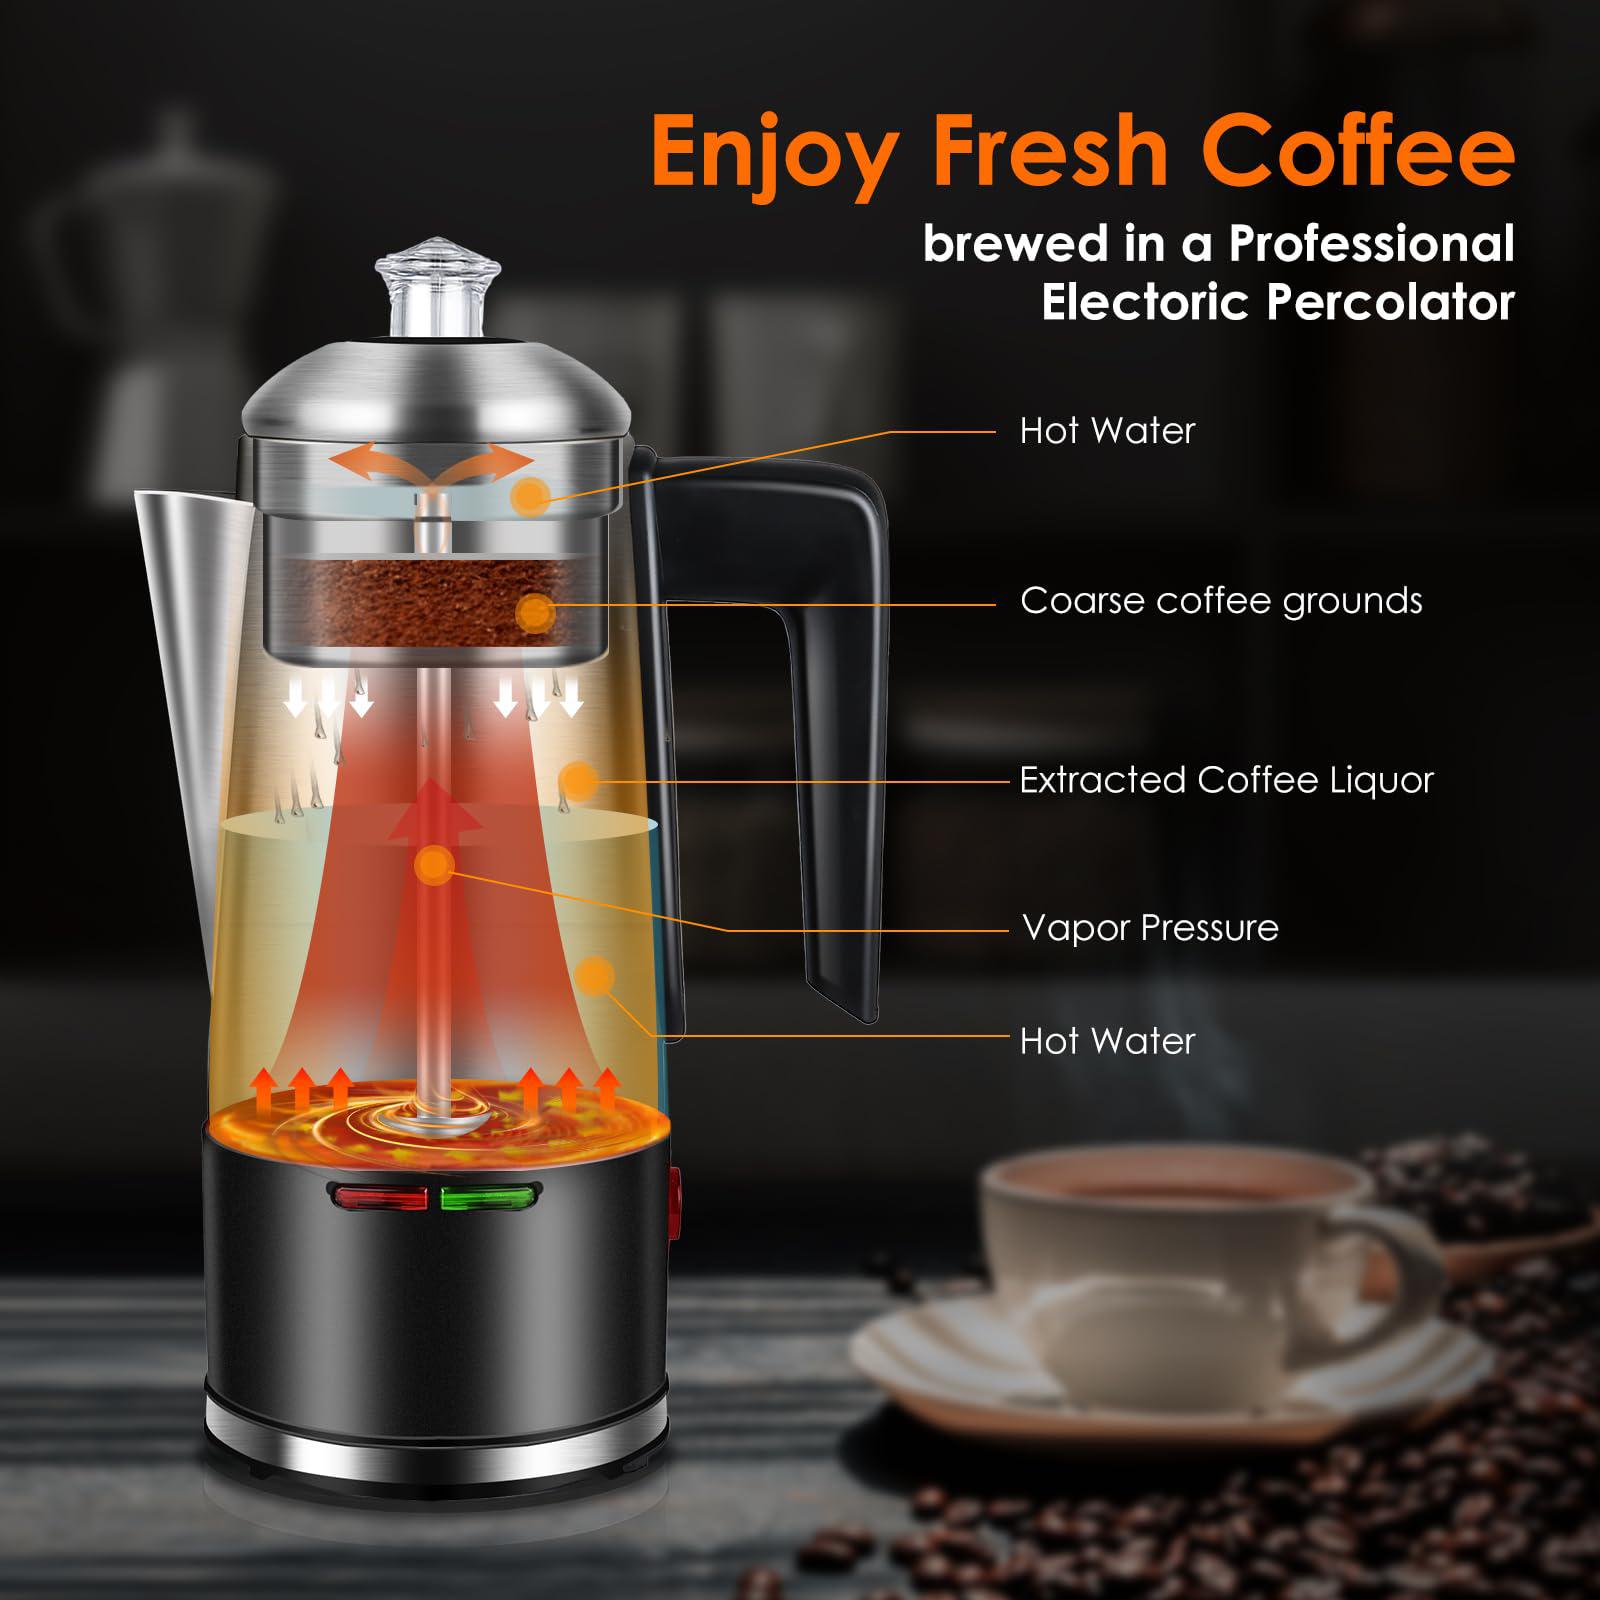 homokus electric coffee percolator 12 cups percolator coffee pot, 800w percolator coffee maker stainless steel with clear kno